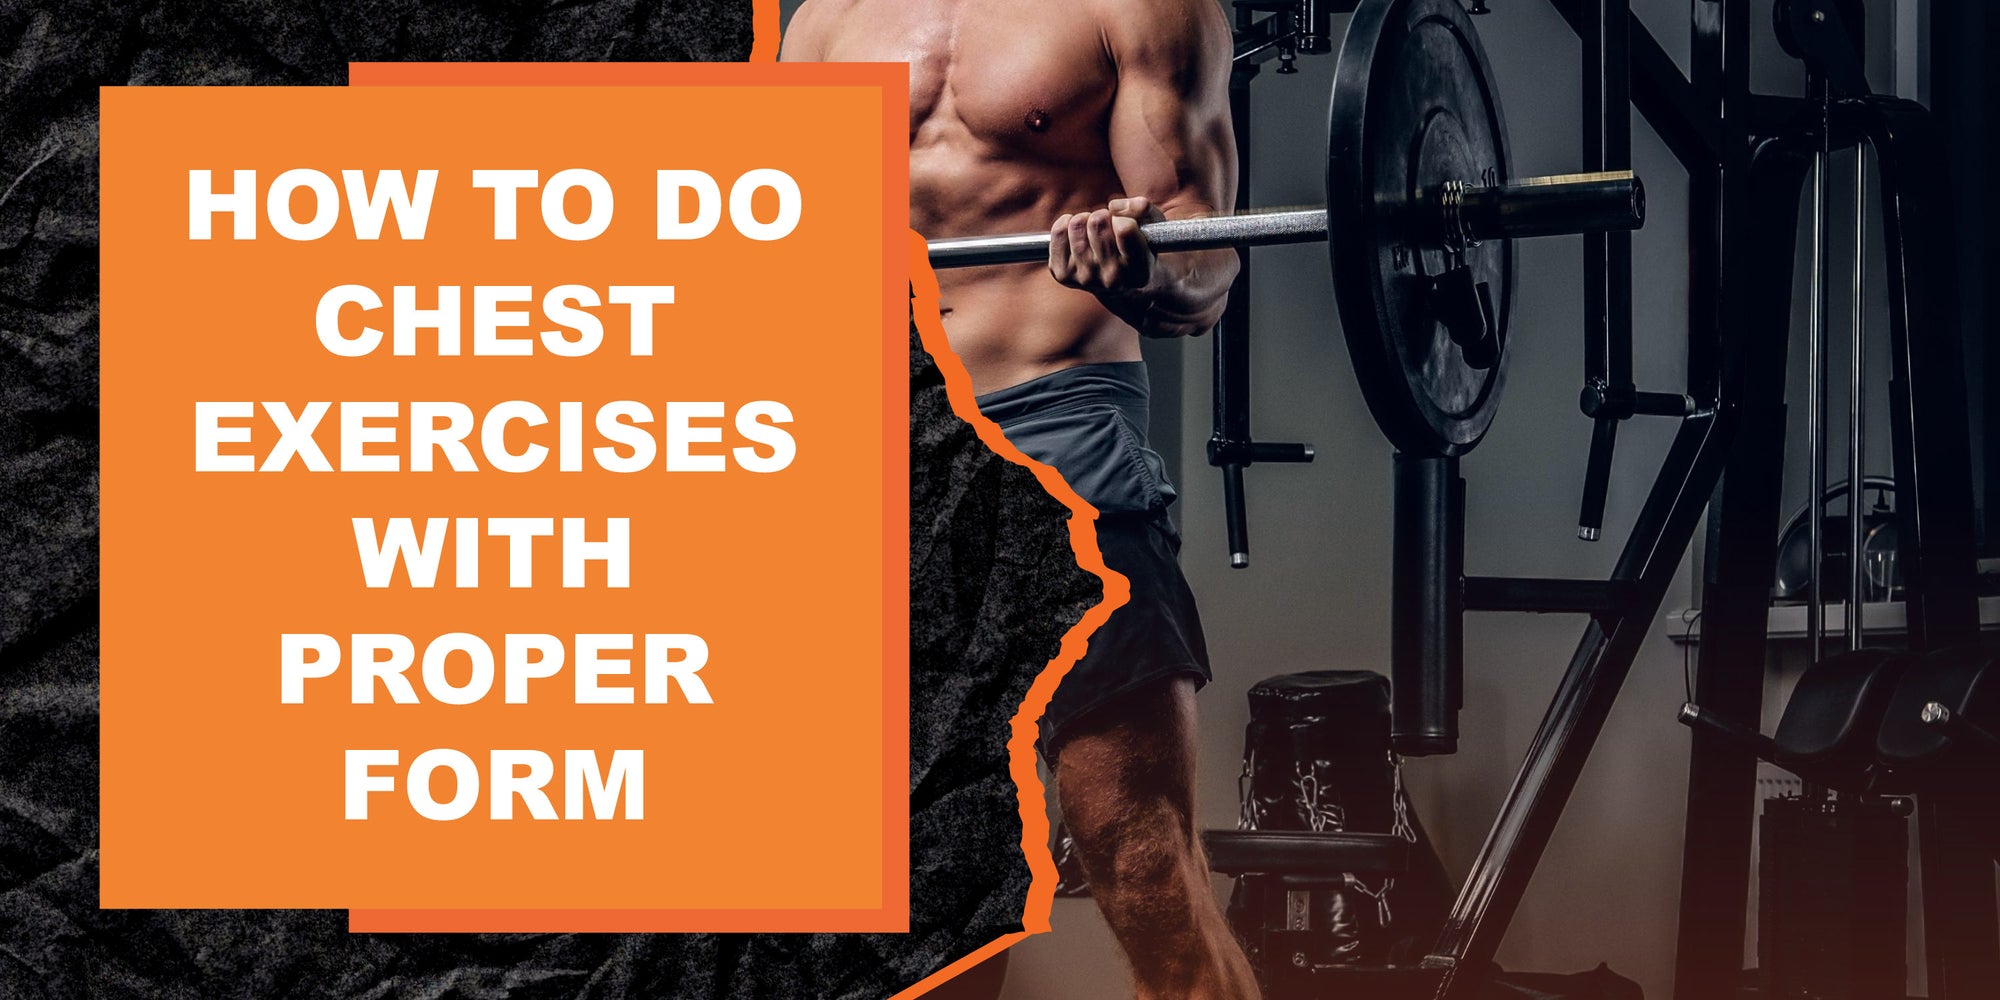 How to Do Chest Exercises with Proper Form